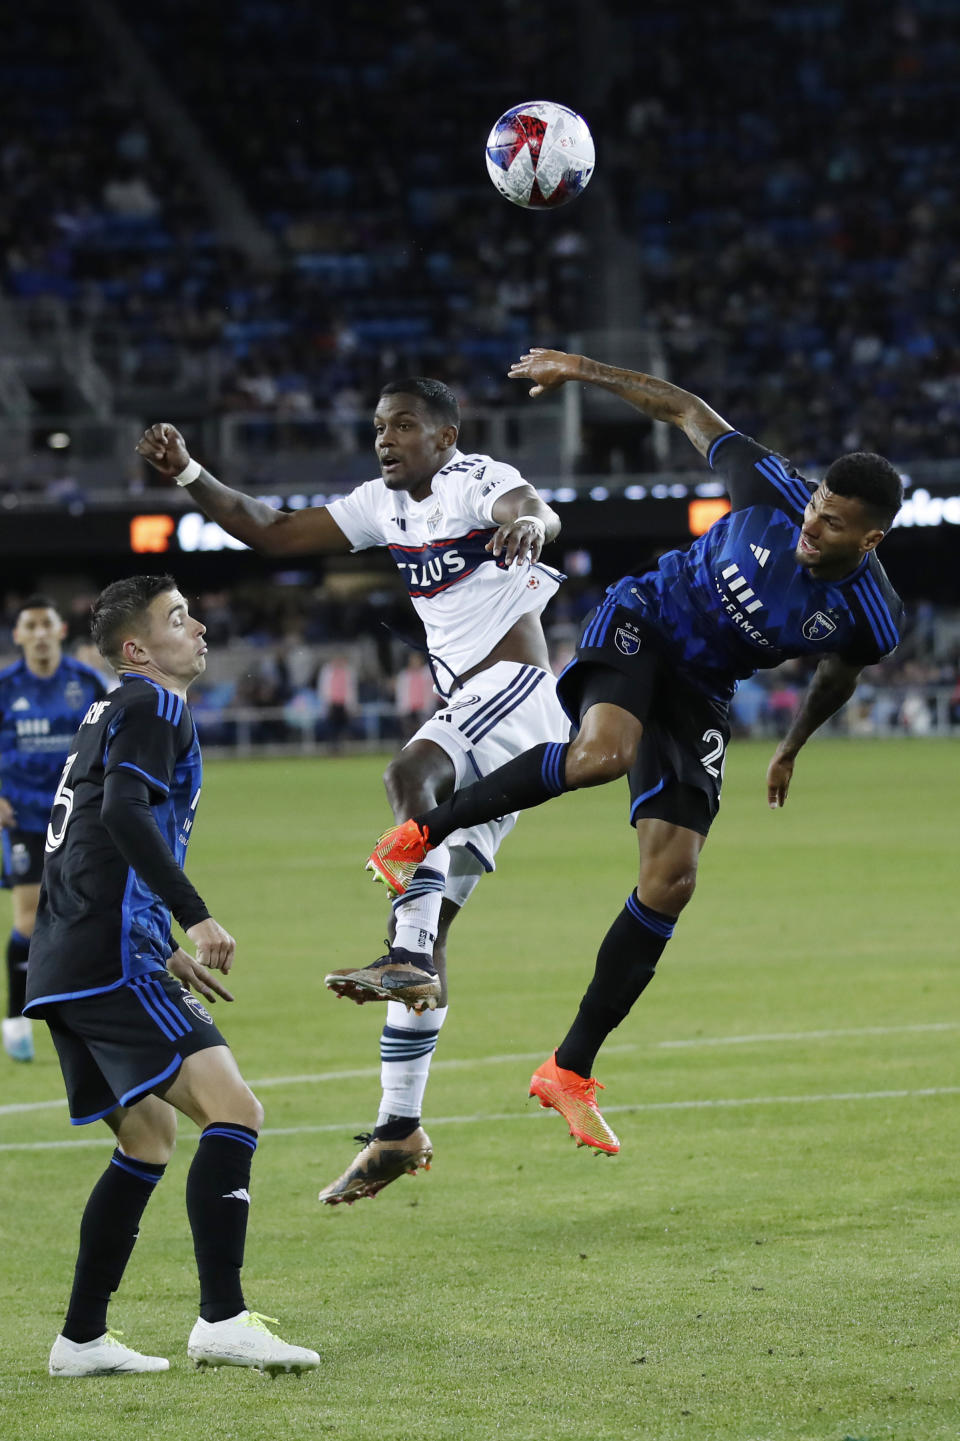 Vancouver Whitecaps forward Sergio Cordova (9) goes up for a header against San Jose Earthquakes defender Rodrigues, right, during the second half of an MLS soccer match in San Jose, Calif., Saturday, March 4, 2023. (AP Photo/Josie Lepe)